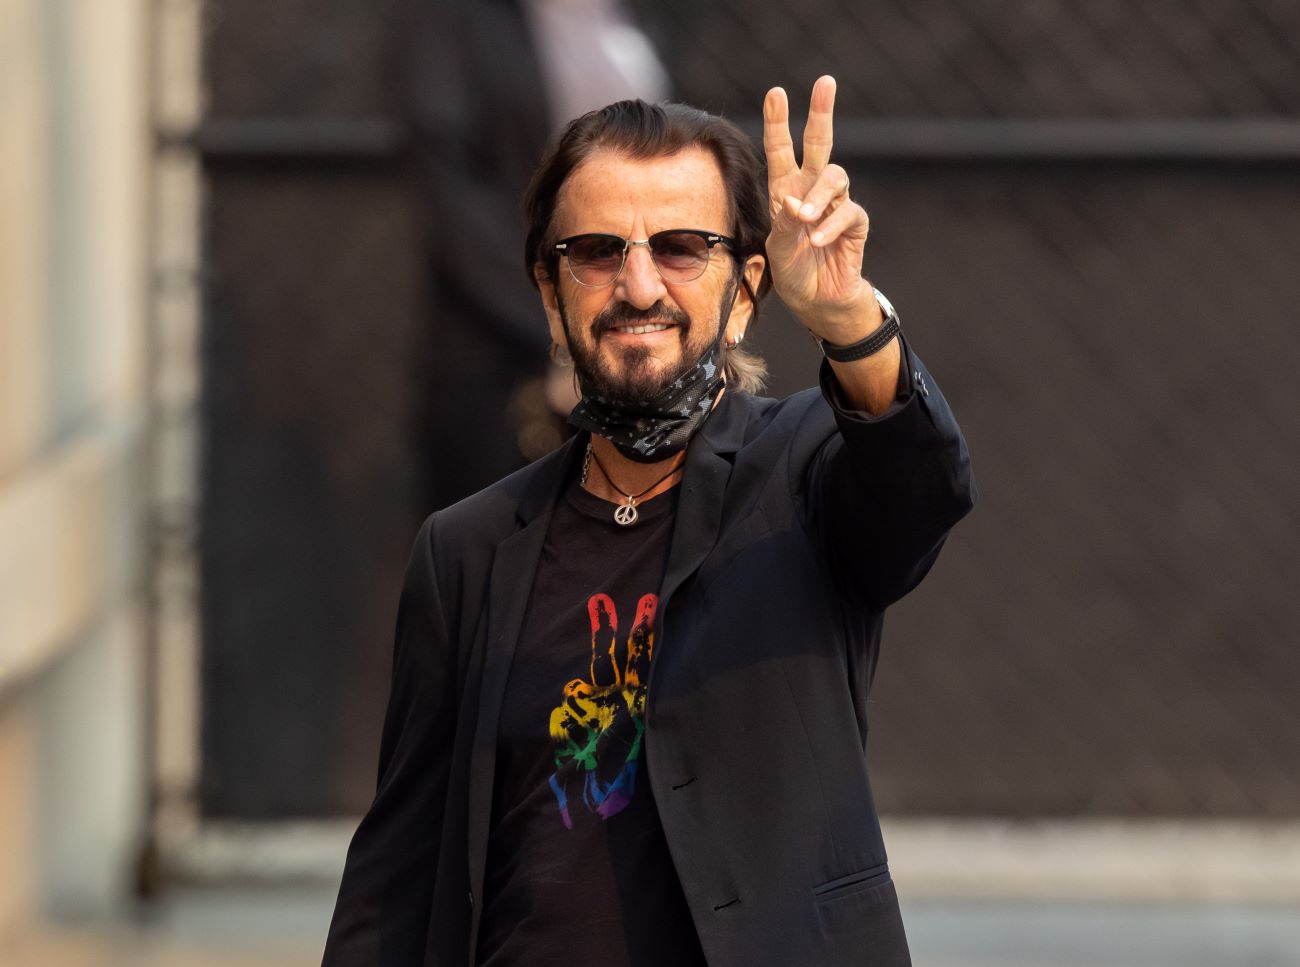 Ringo Starr wears a peace sign shirt and holds his hand in a peace sign.